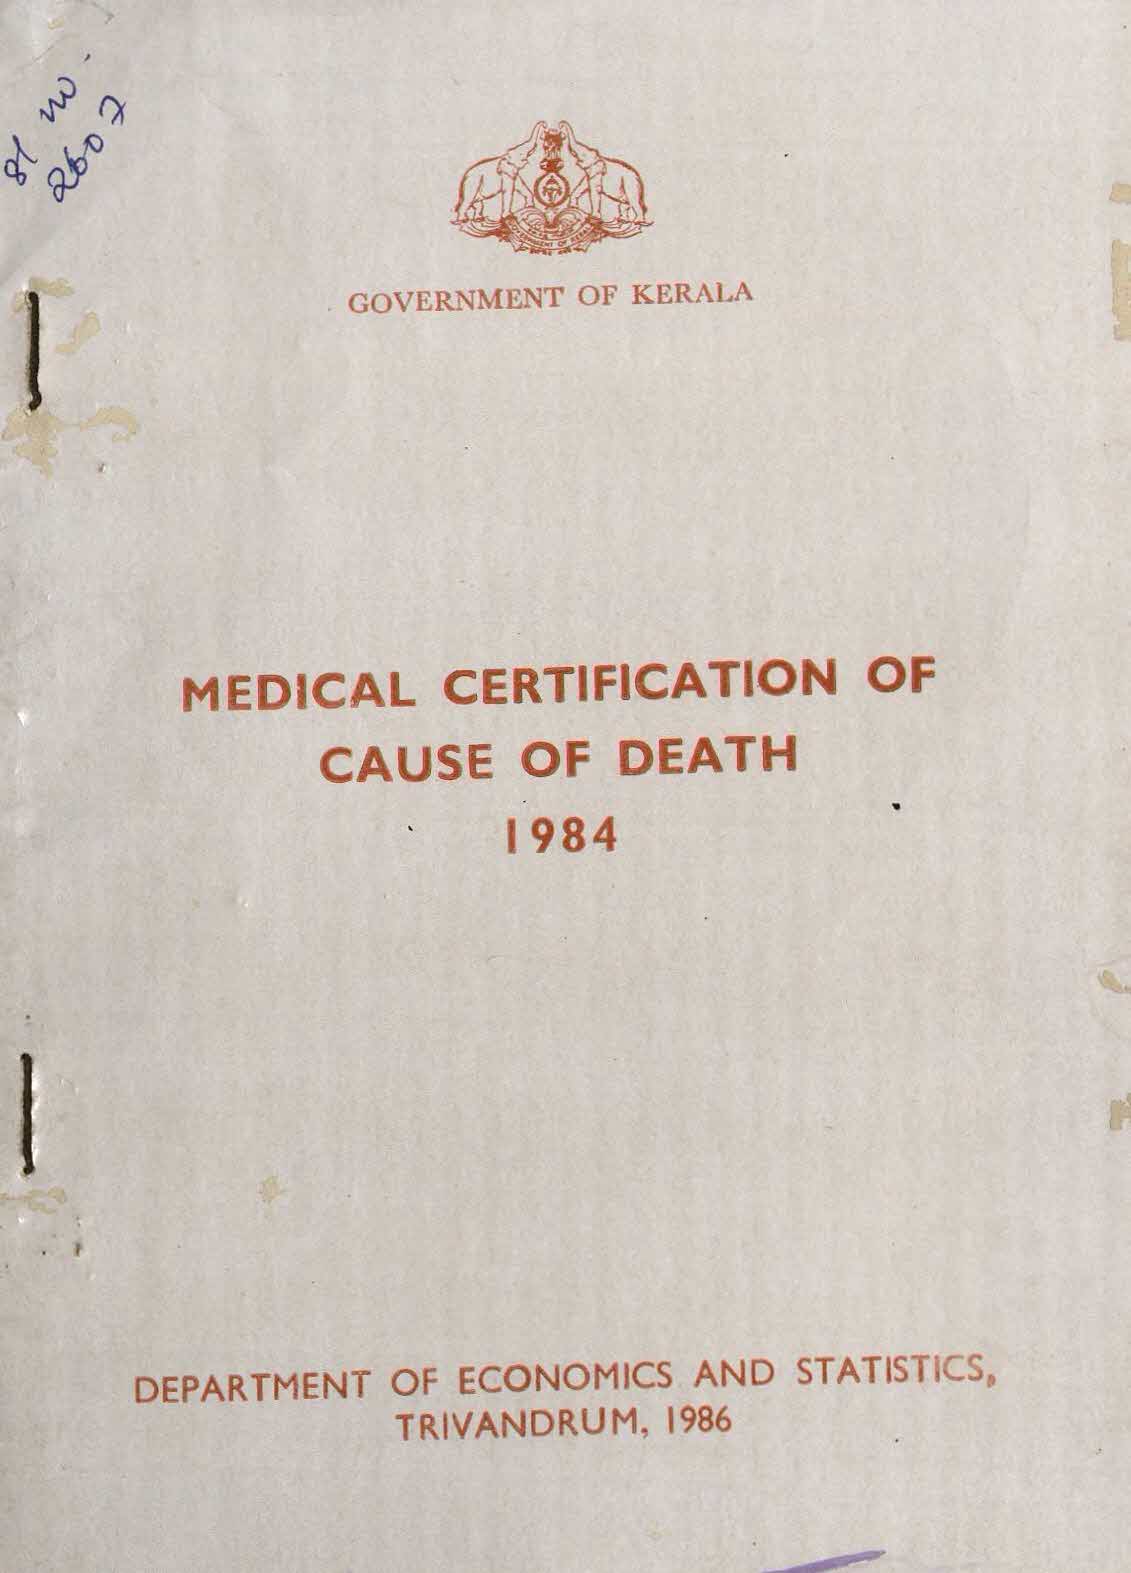 MEDICAL CERTIFICATION OF CAUSE OF DEATH 1984